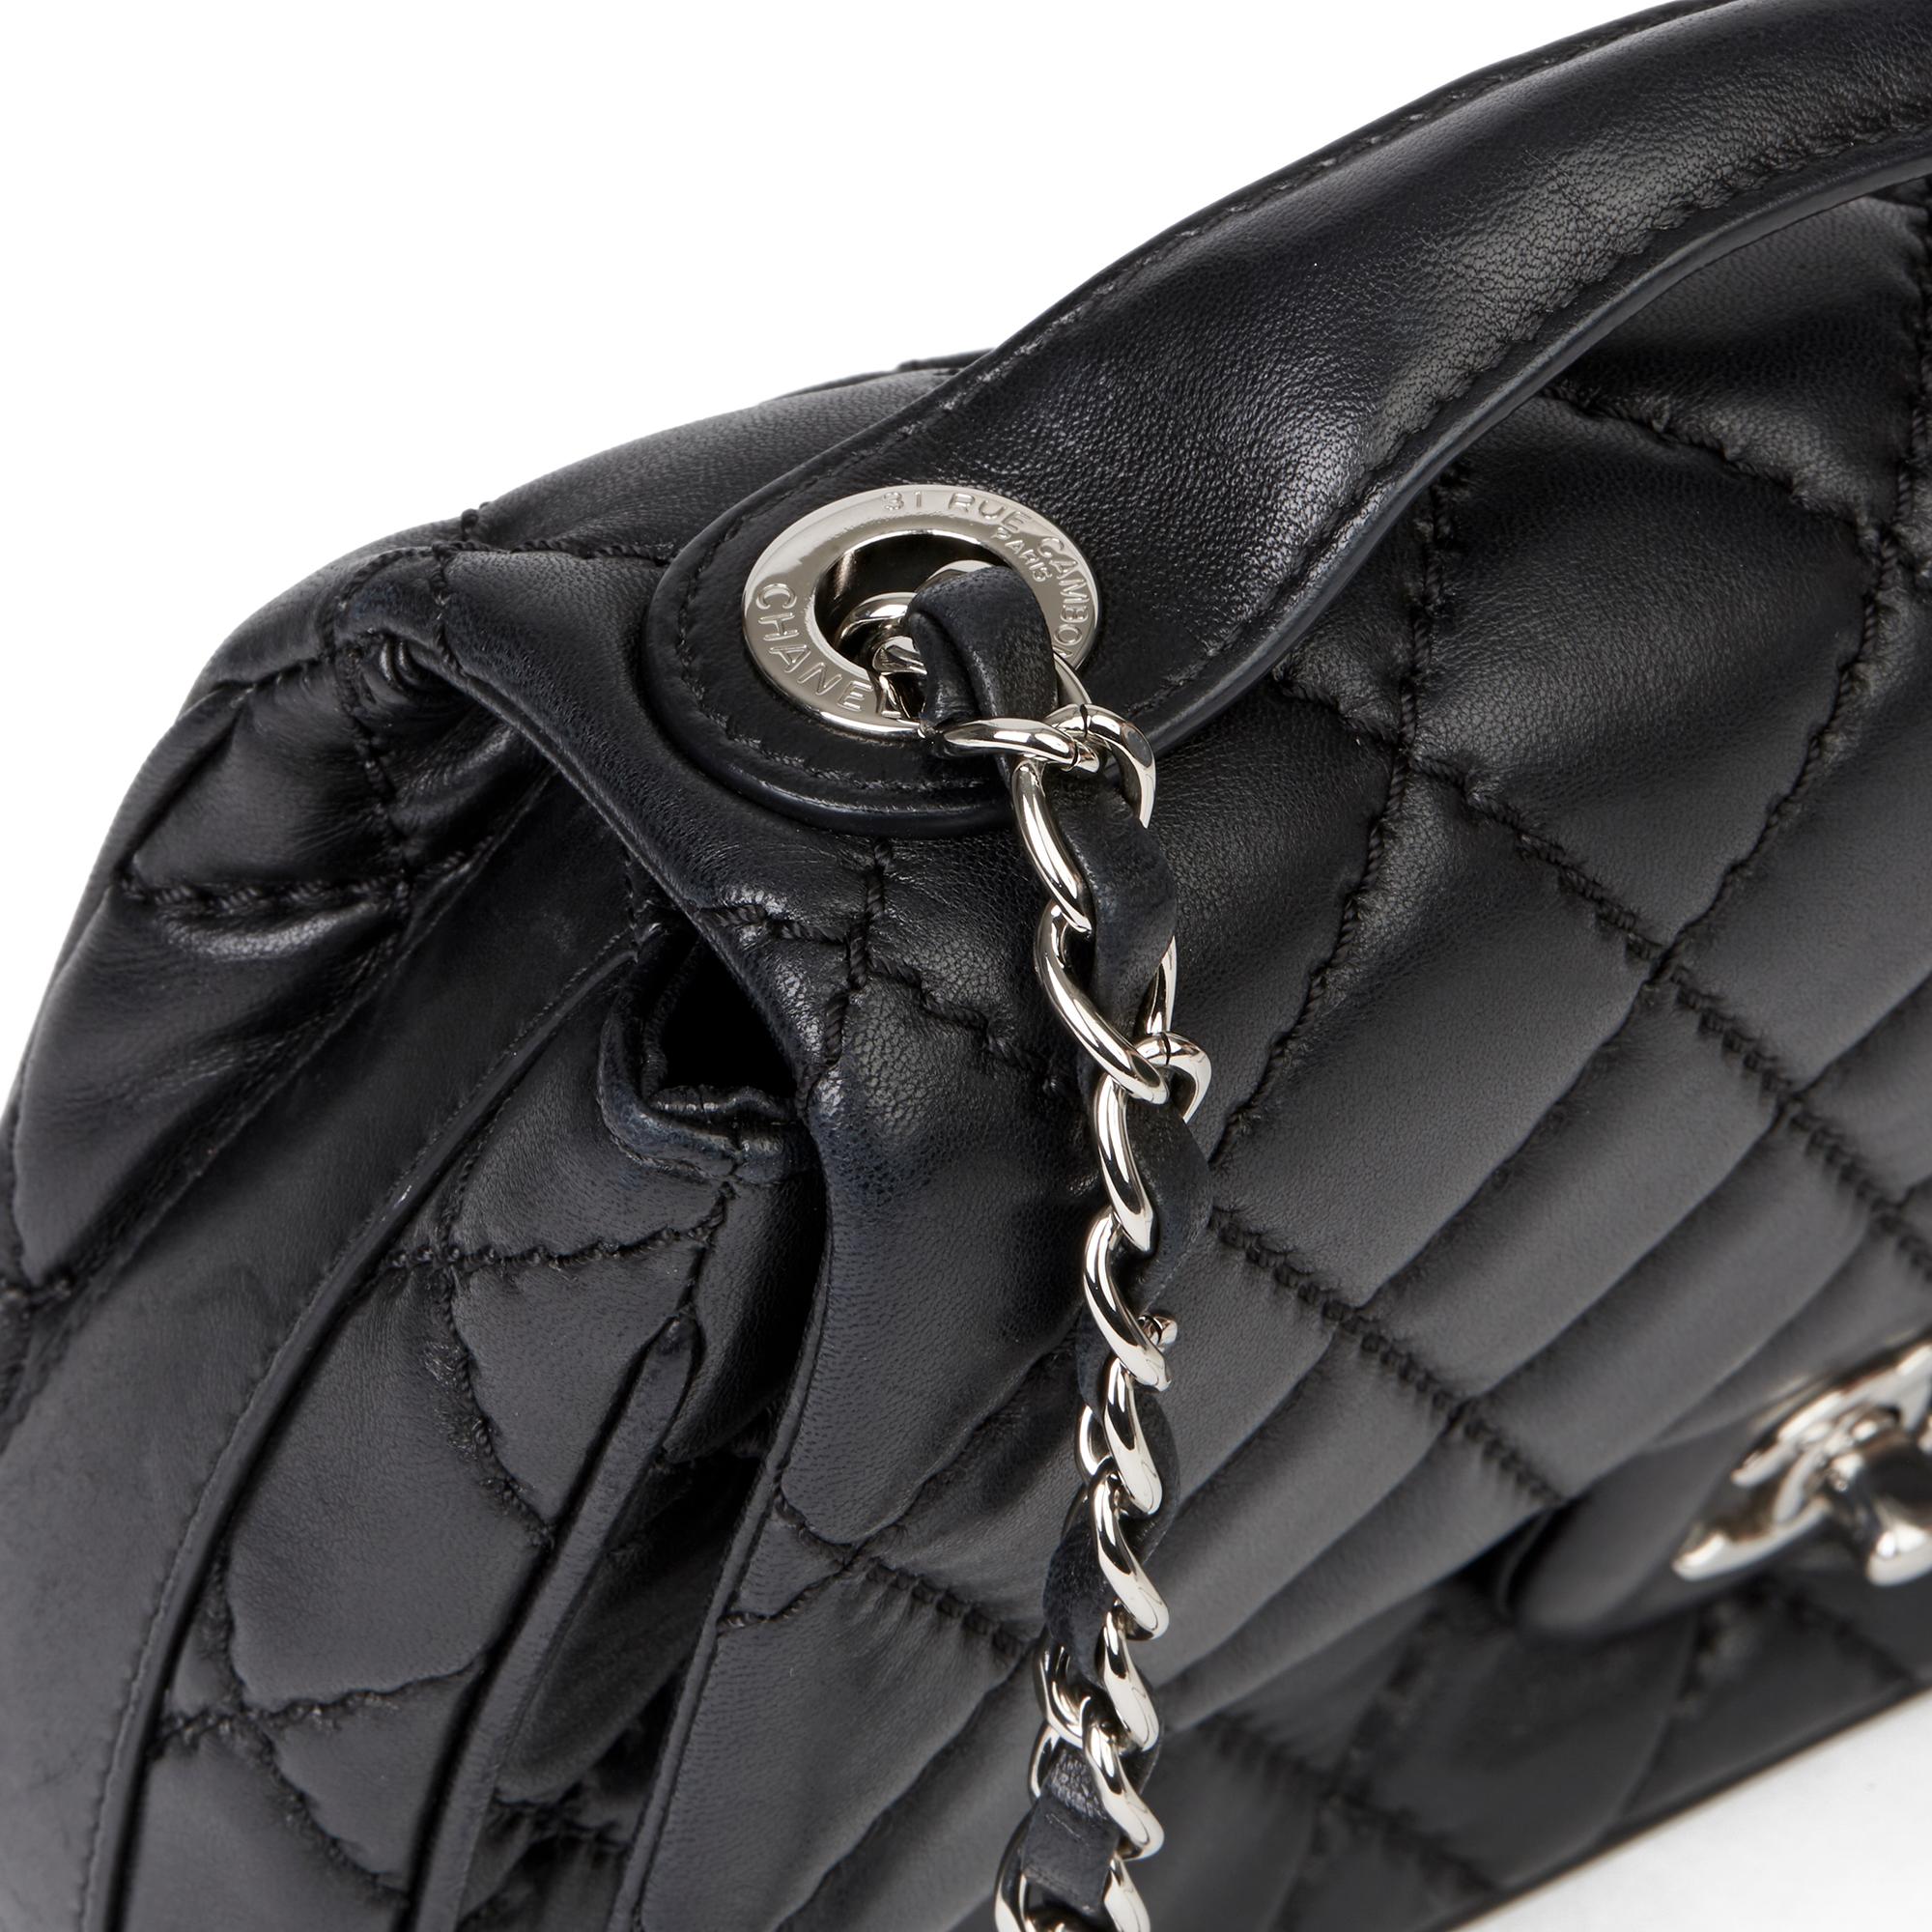 2015 Chanel Black Quilted Lambskin Medium Easy Carry Flap Bag 1